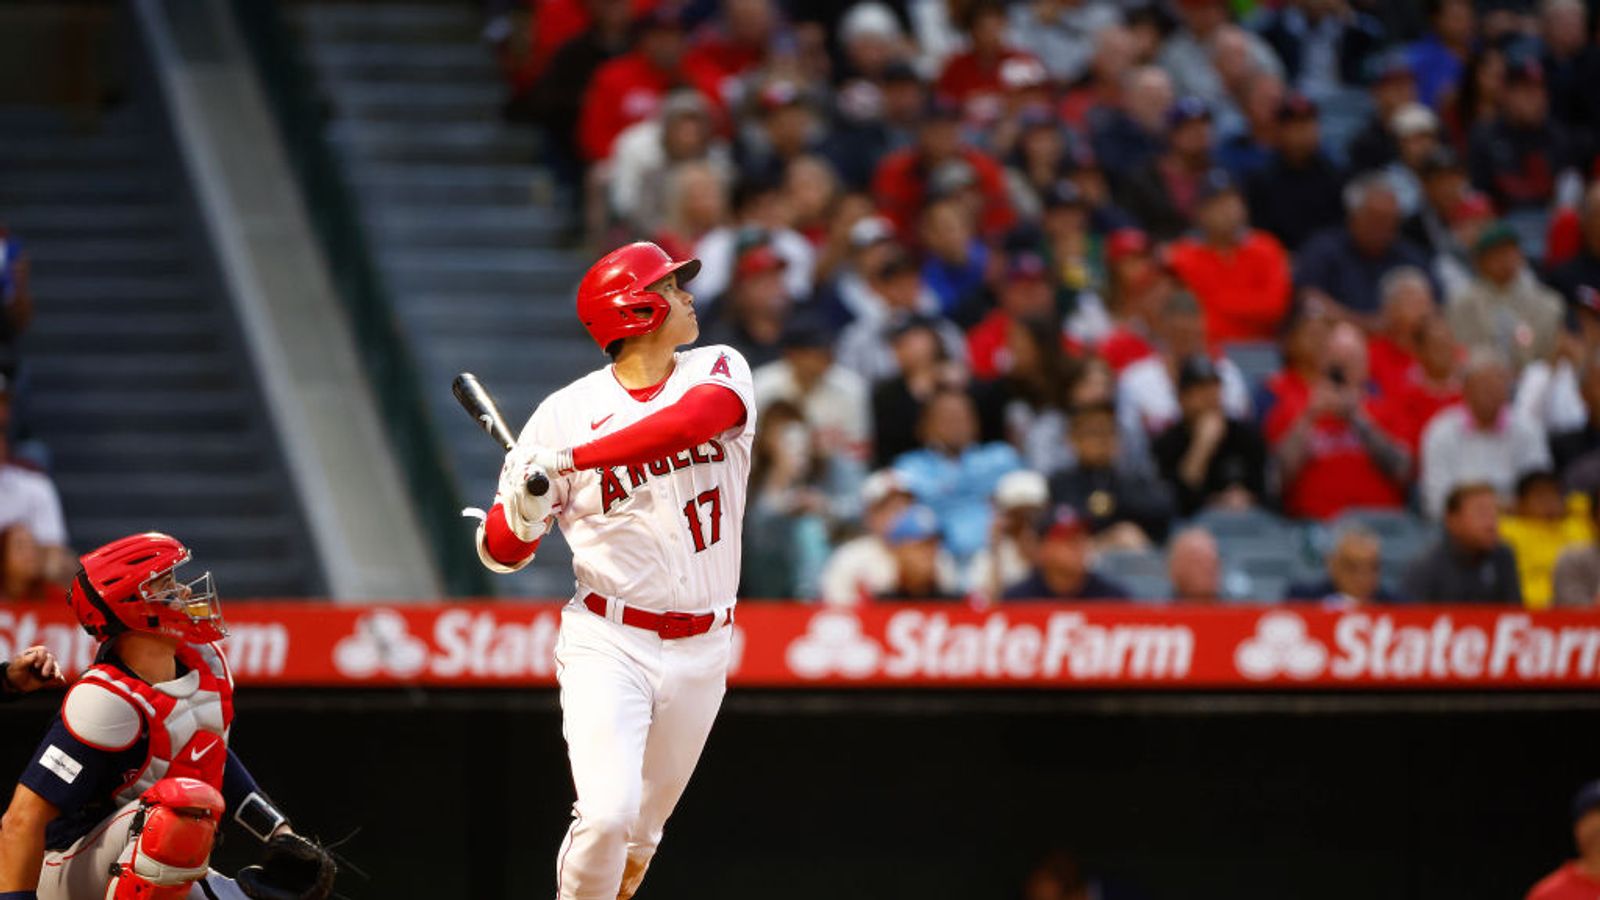 BSJ Game Report: Angels 4, Red Sox 0 - Another ugly night at the